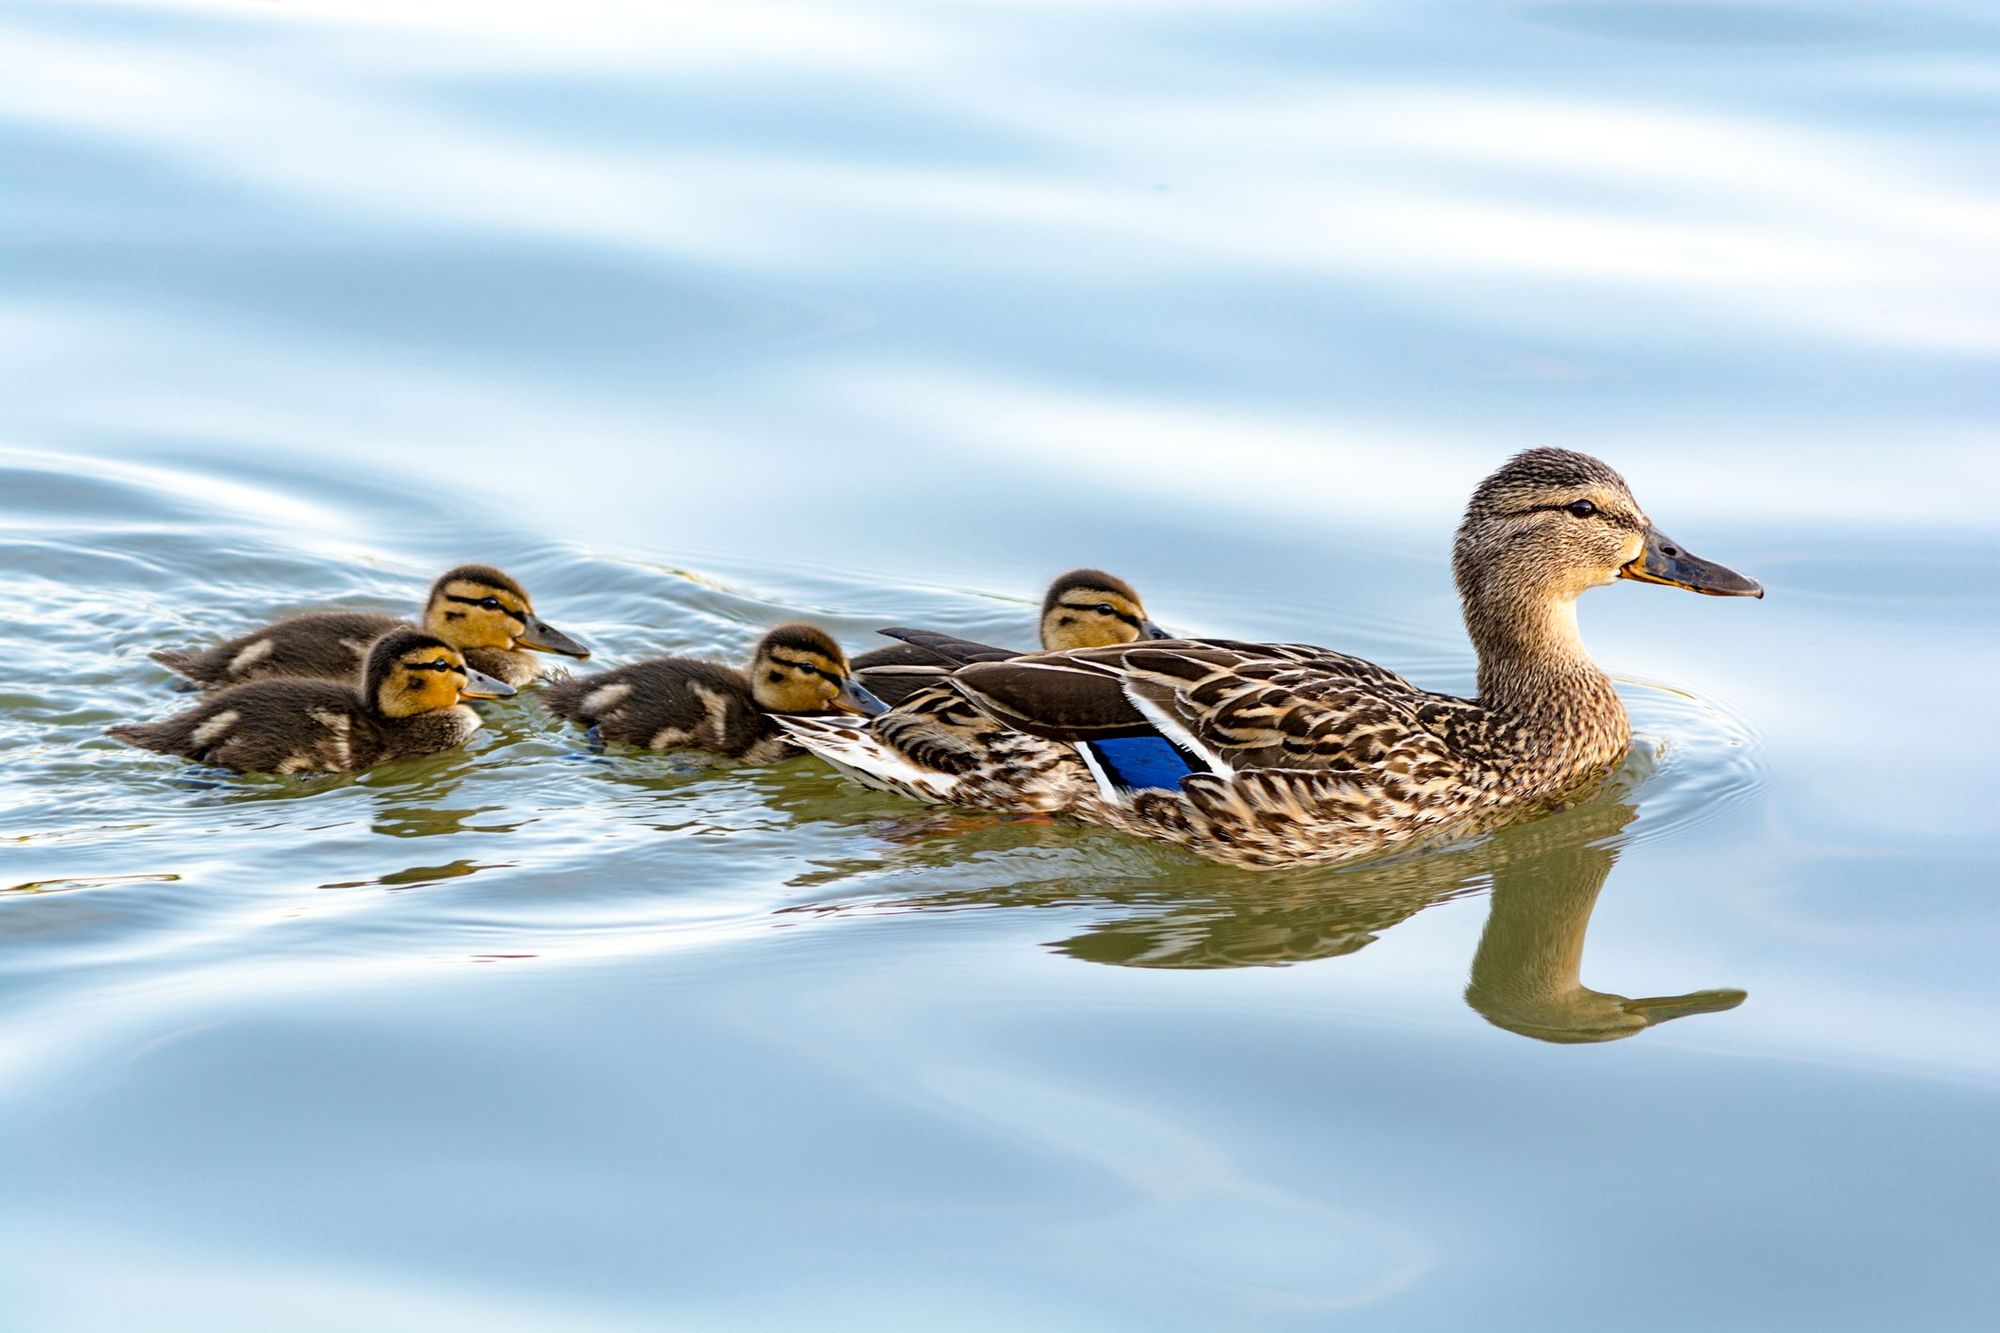 A duck and four of her ducklings moving through the water.